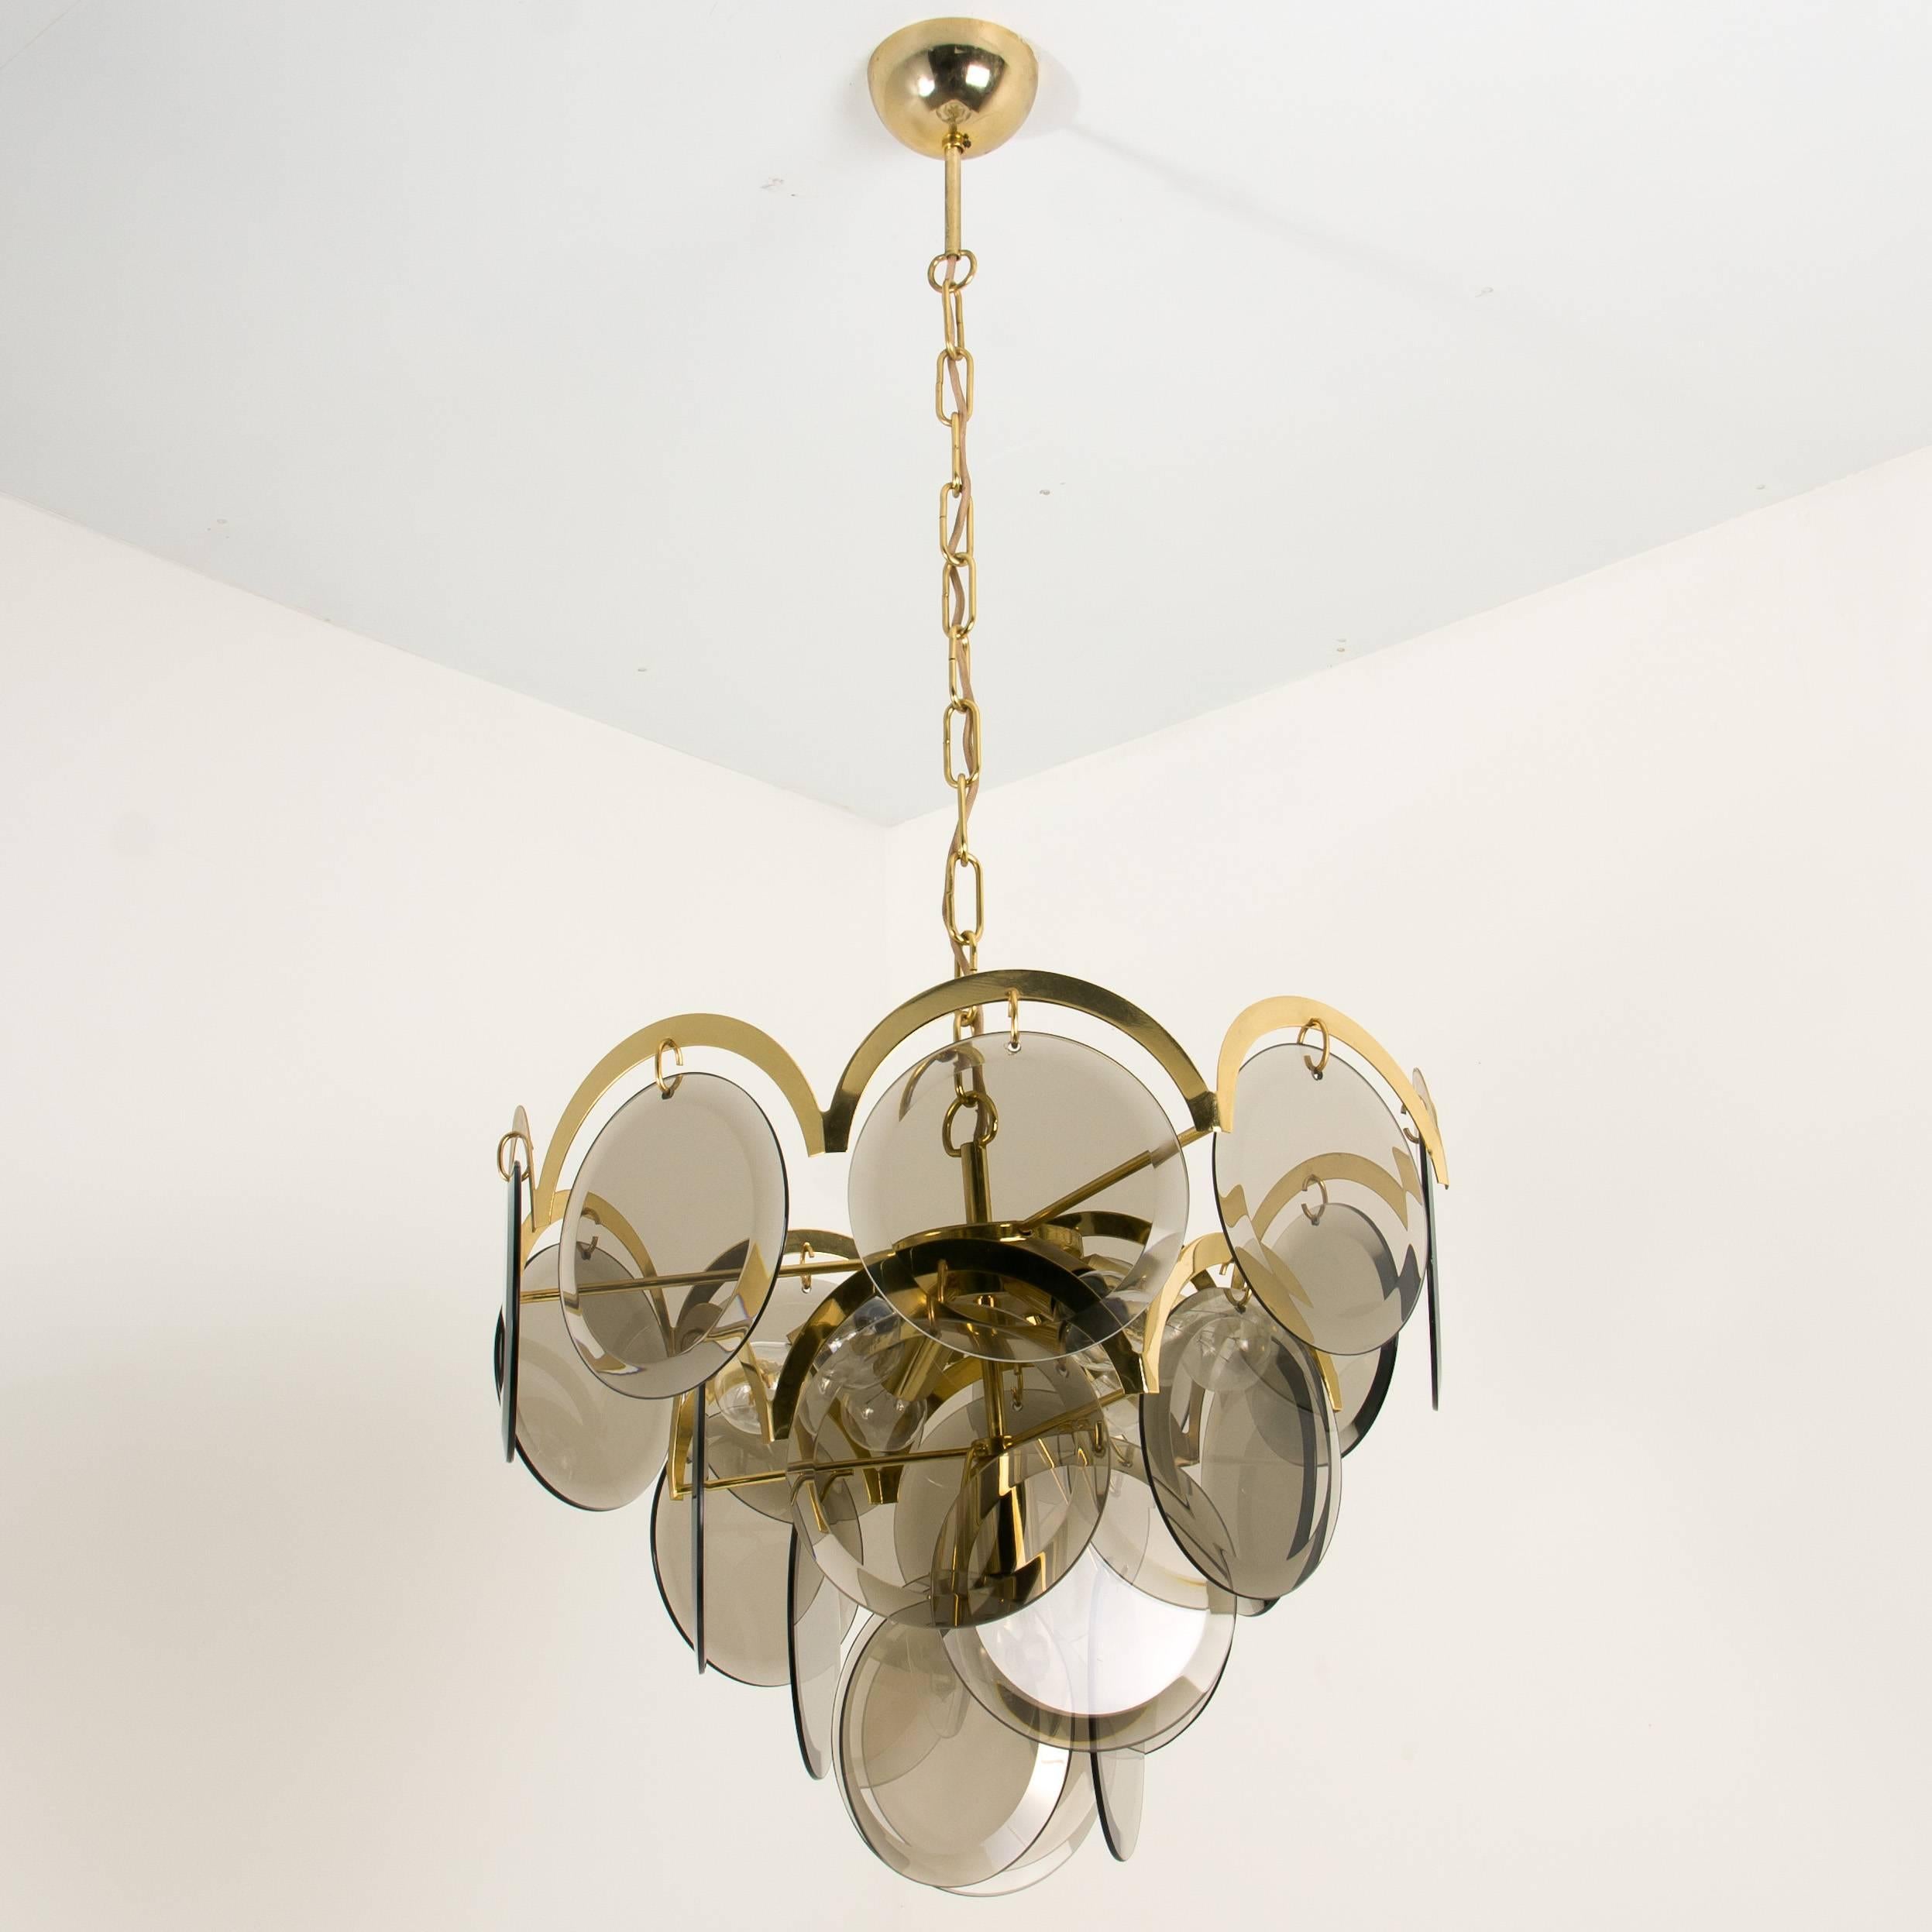 Mid-Century Modern Smoked Glass and Brass Chandeliers in the Style of Vistosi, Italy